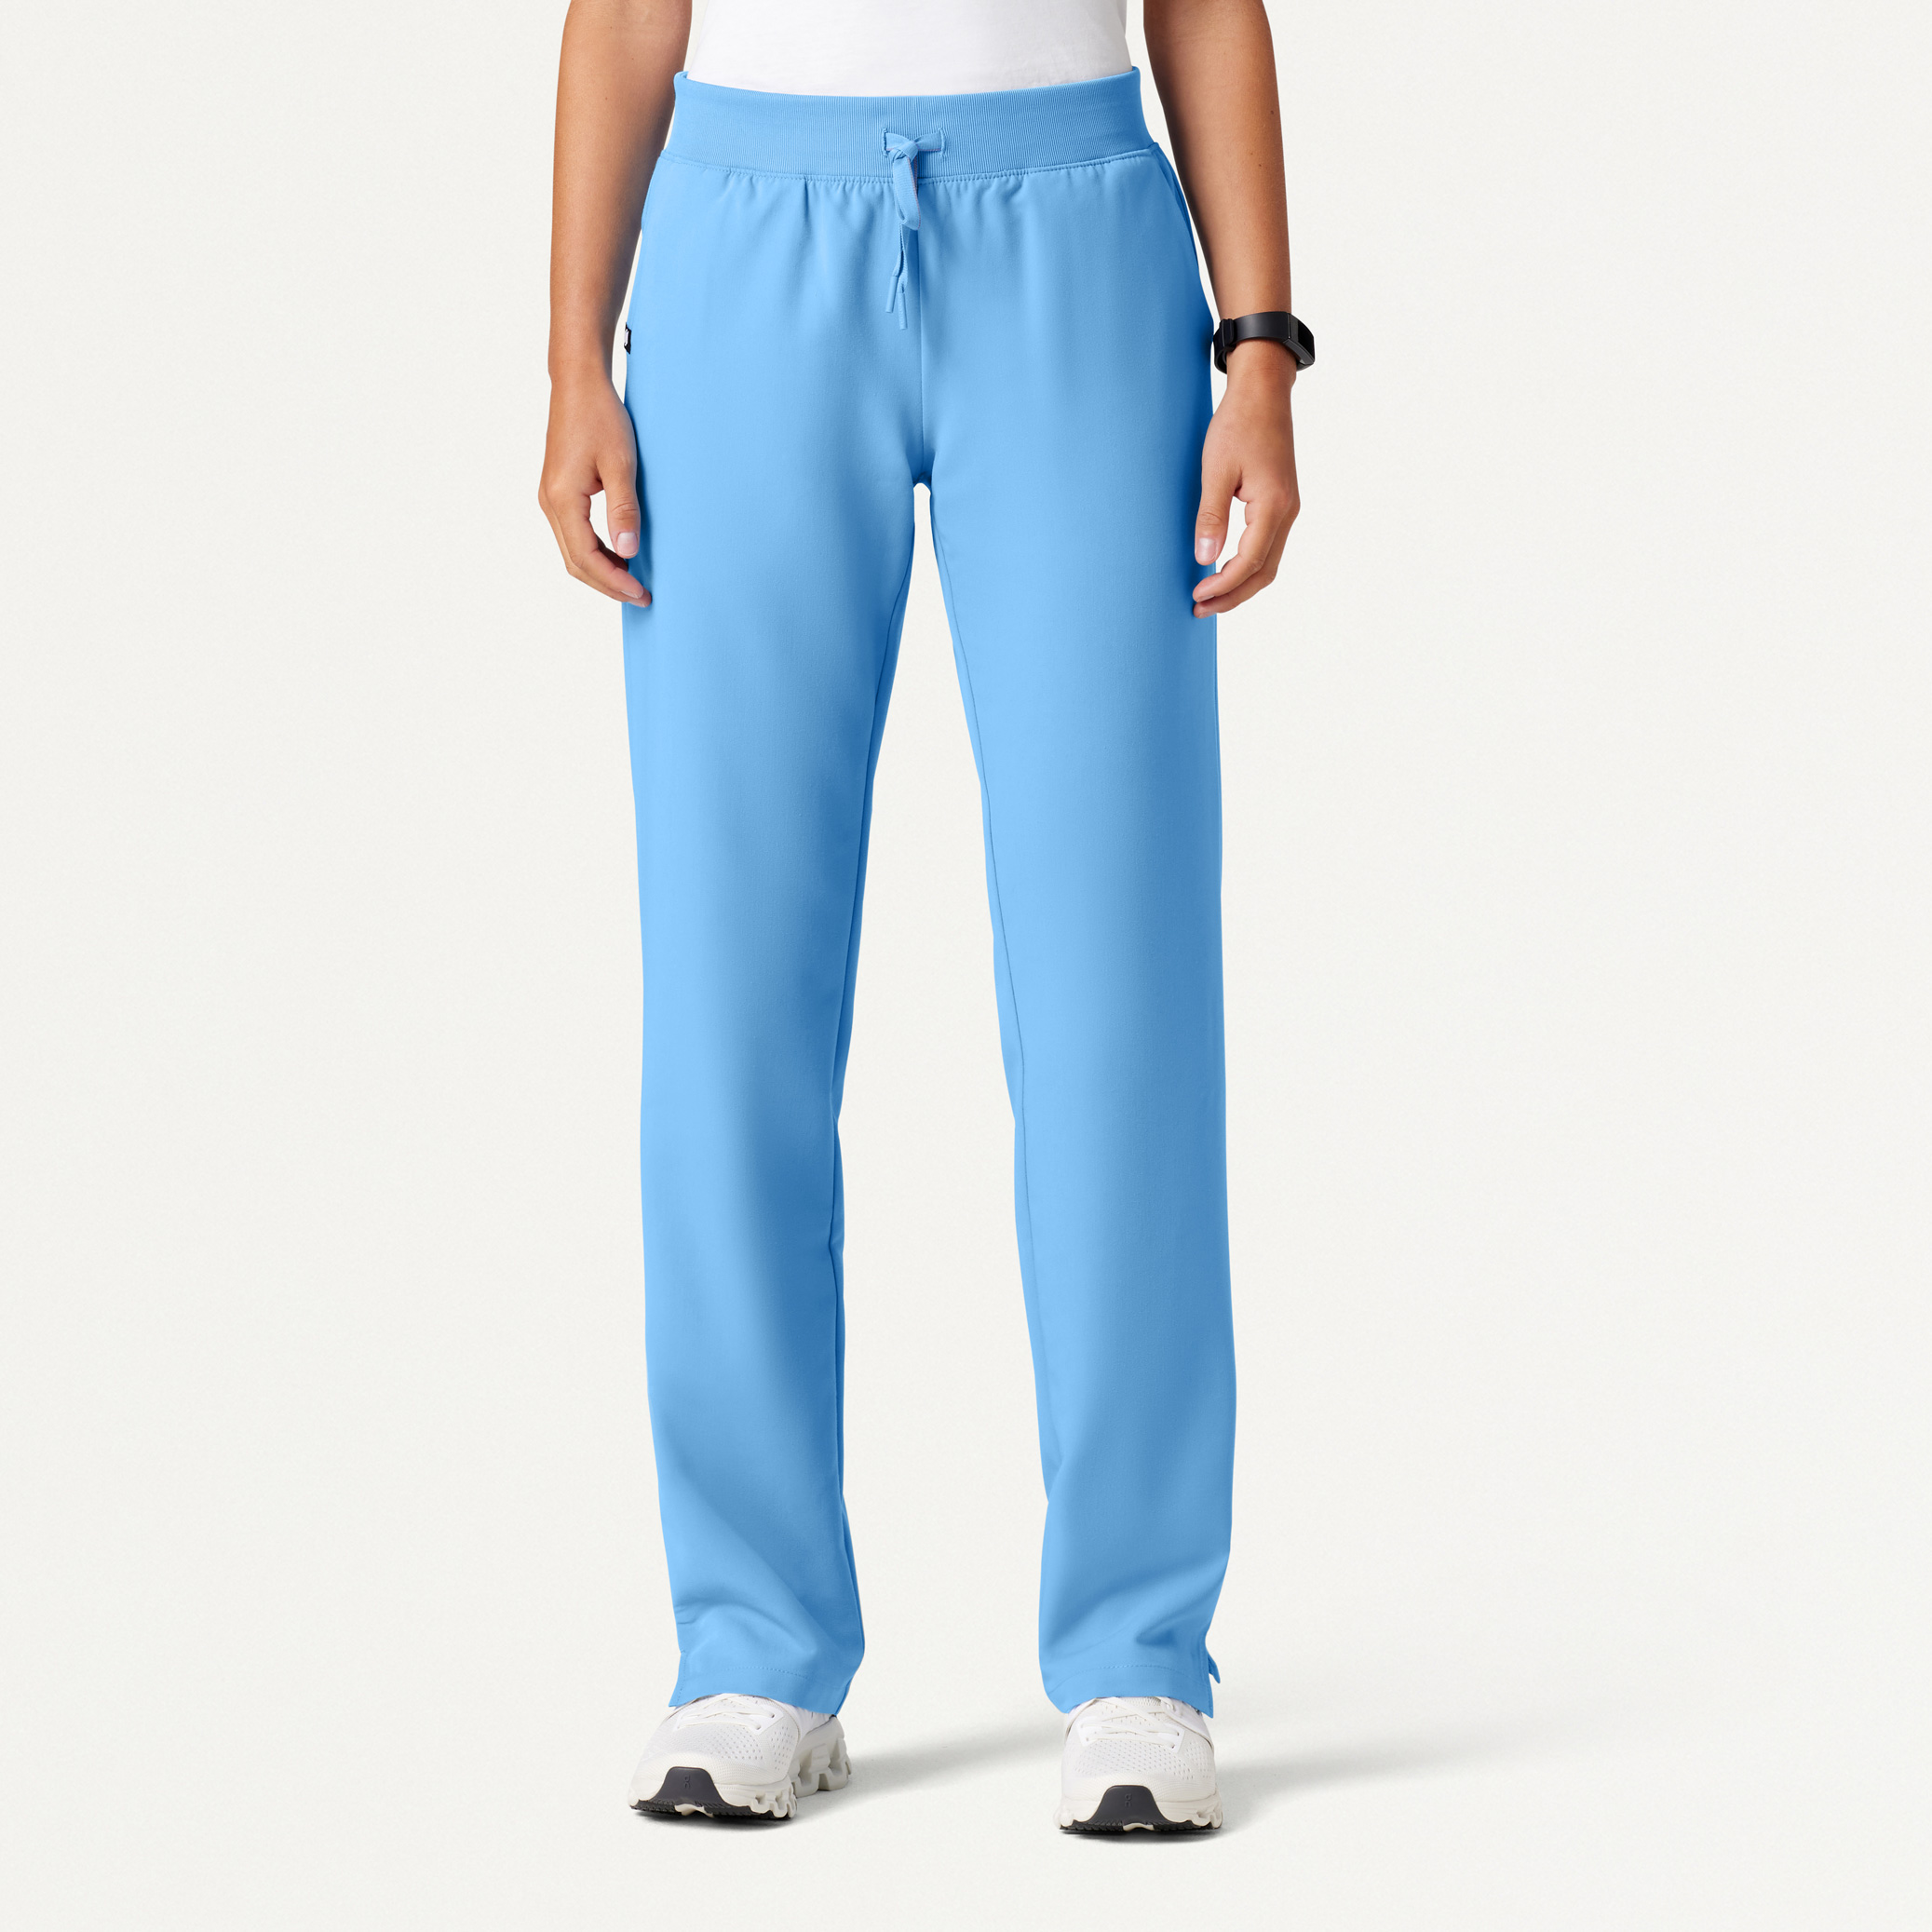 Unisex 70 Polyester and 30 Cotton Blue Scrub Suit